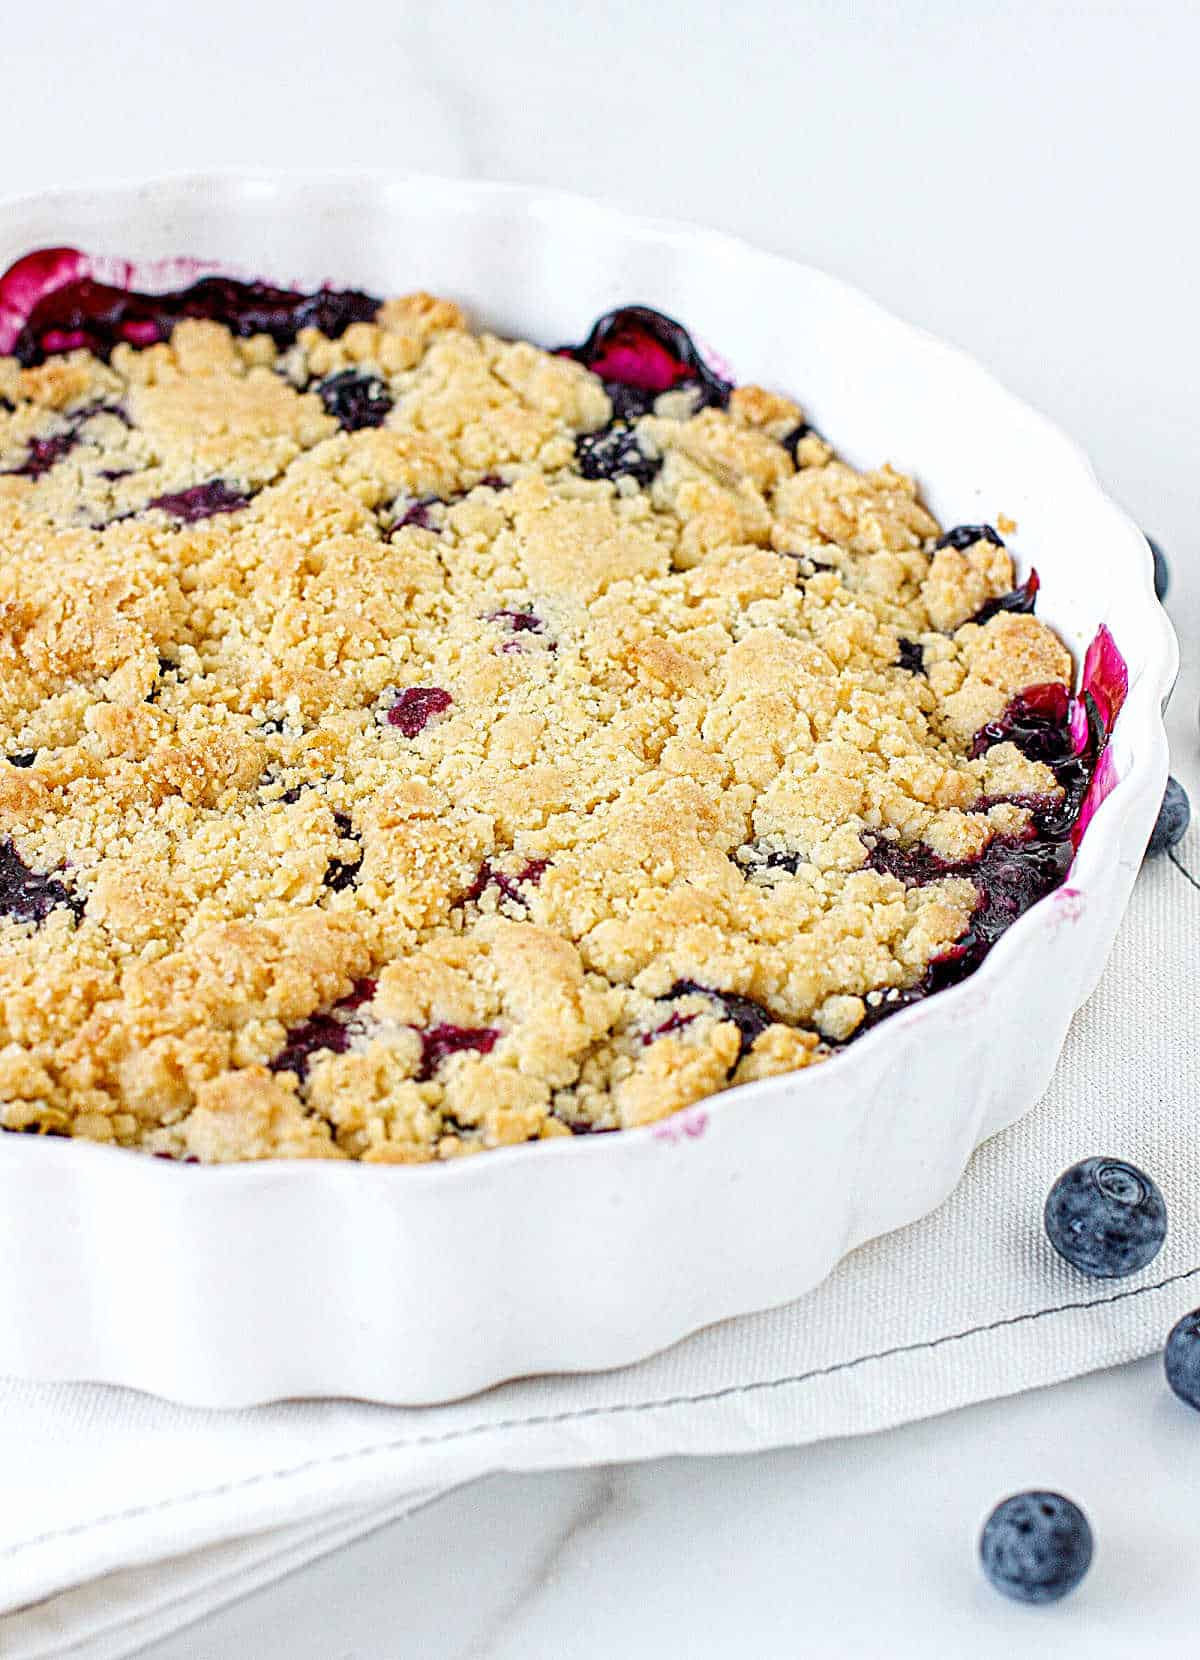 Round white baking dish with baked blueberry dump cake on a white cloth with a white background. 